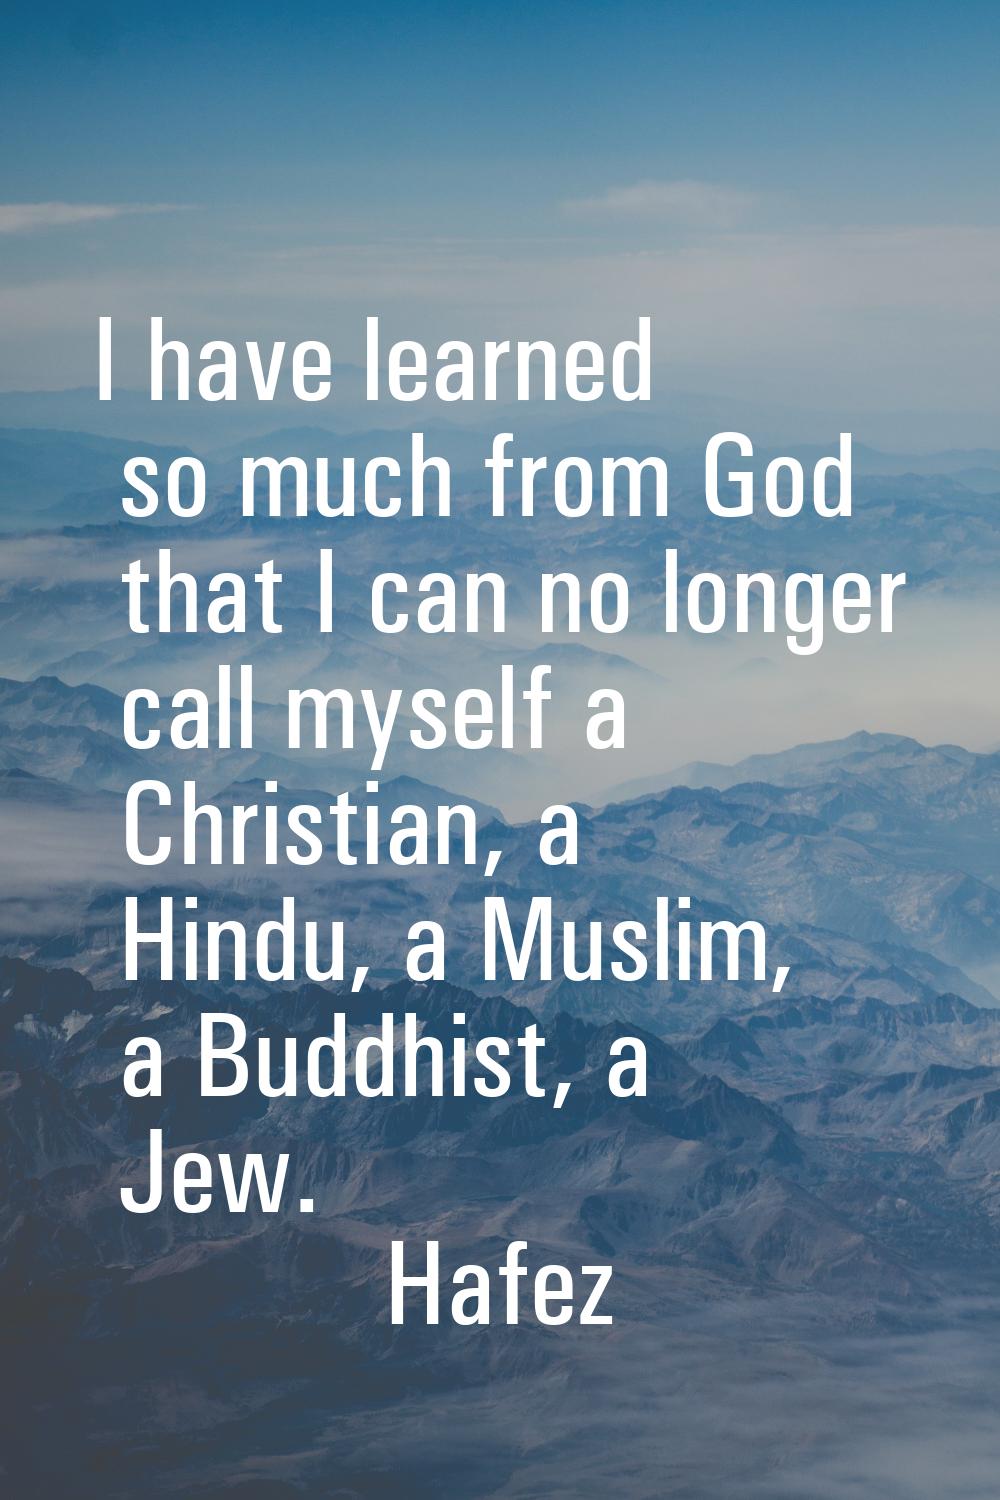 I have learned so much from God that I can no longer call myself a Christian, a Hindu, a Muslim, a 